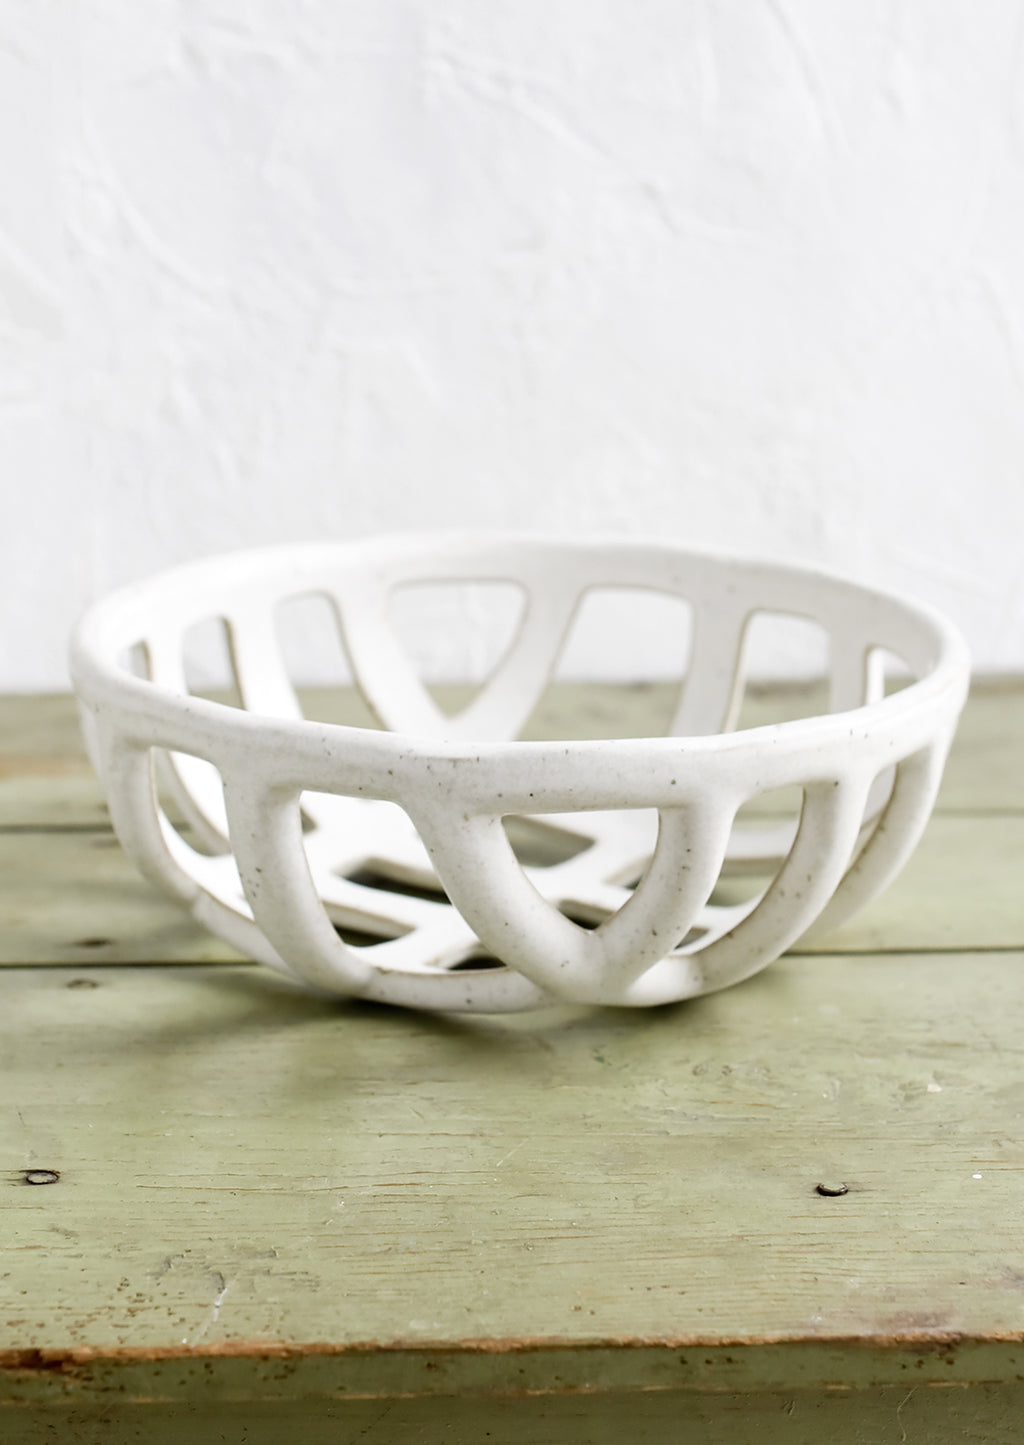 Large: A white ceramic fruit bowl with open weave design.